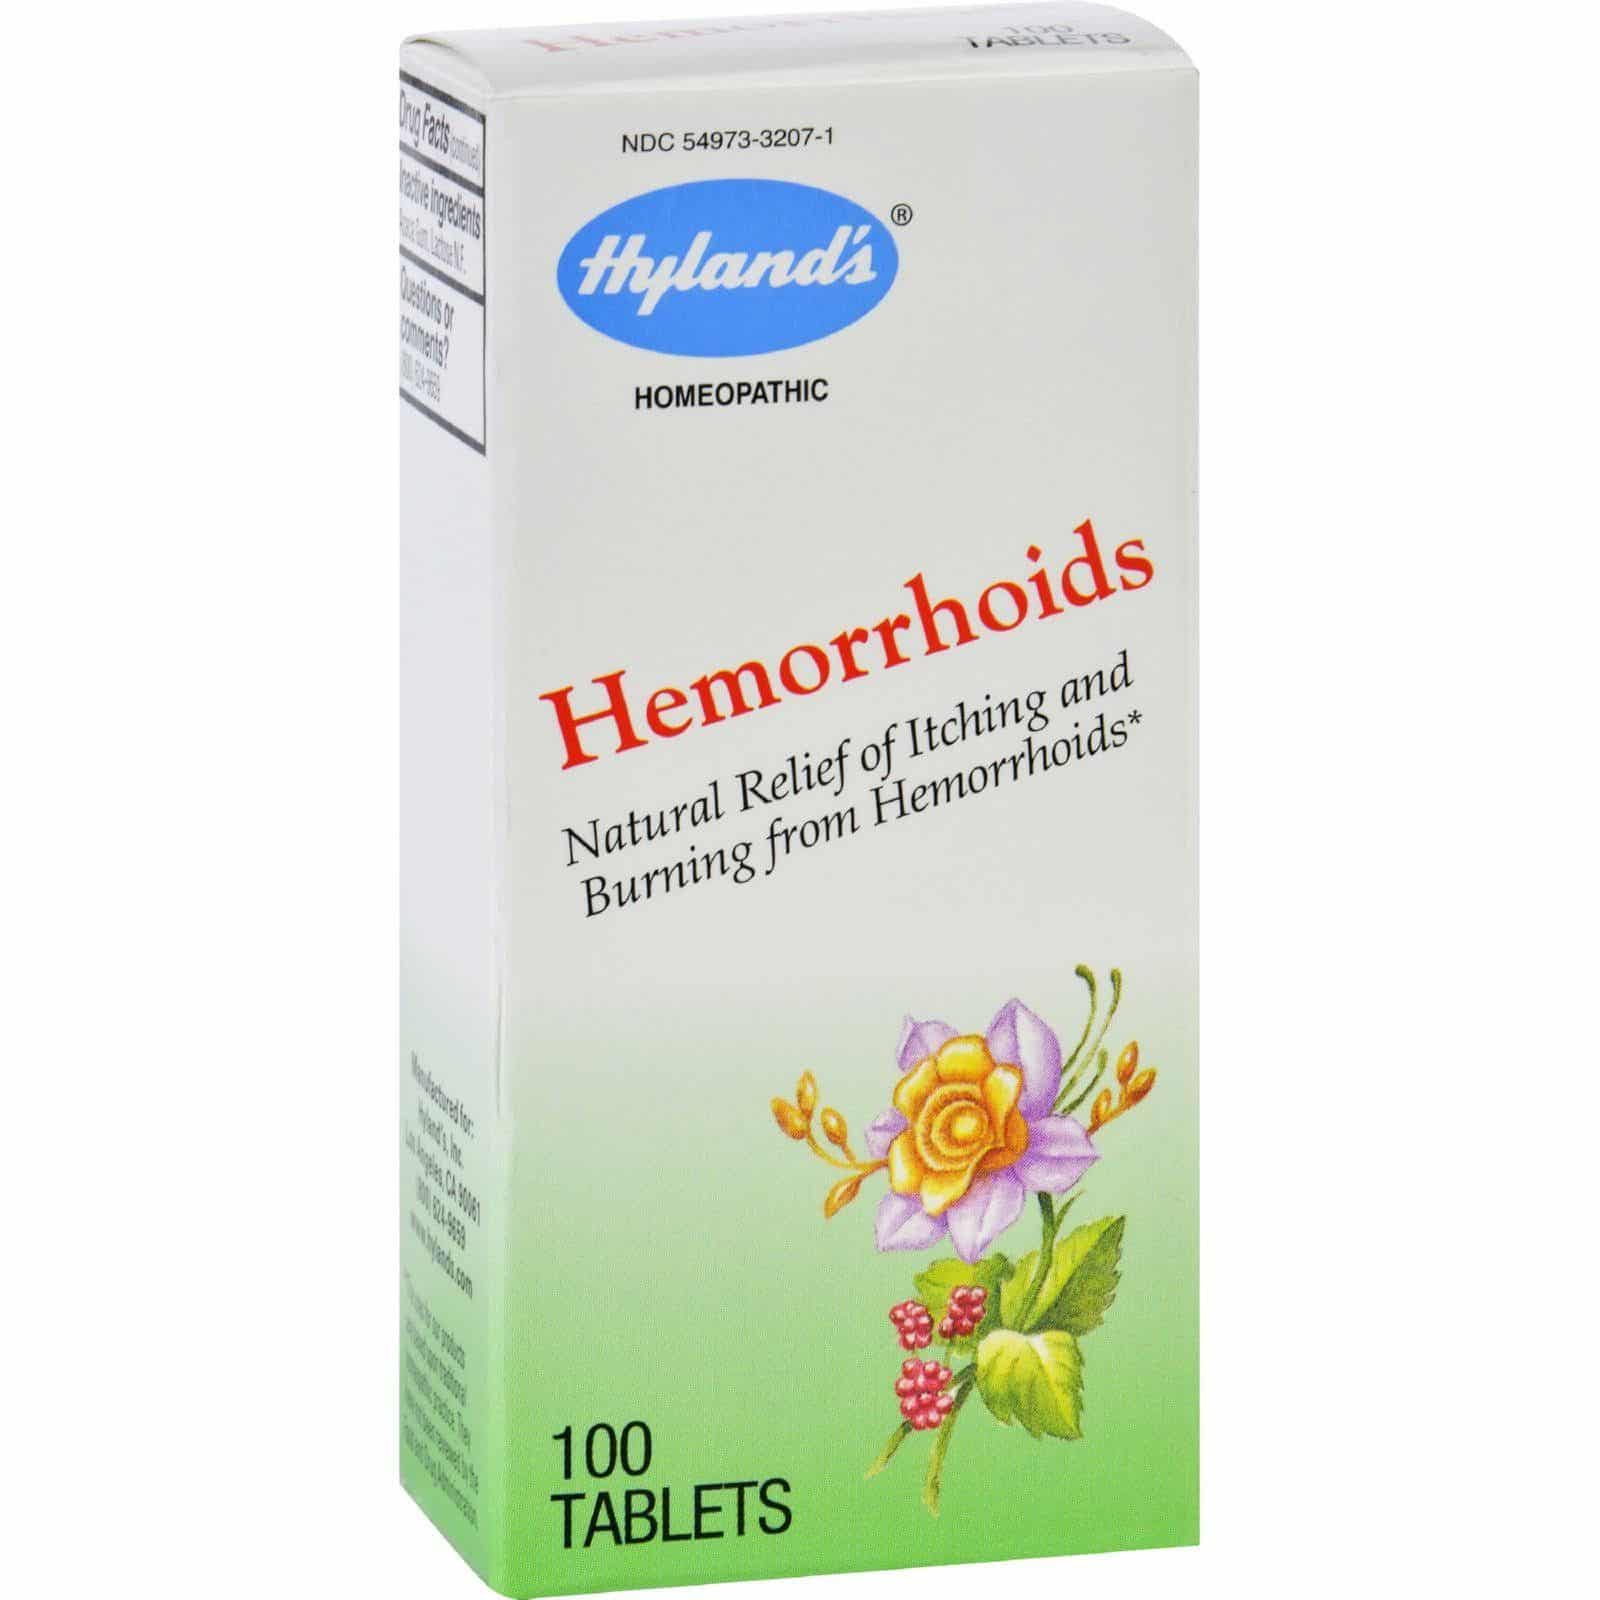 Hylands Homeopathic Hemorrhoid Tablets